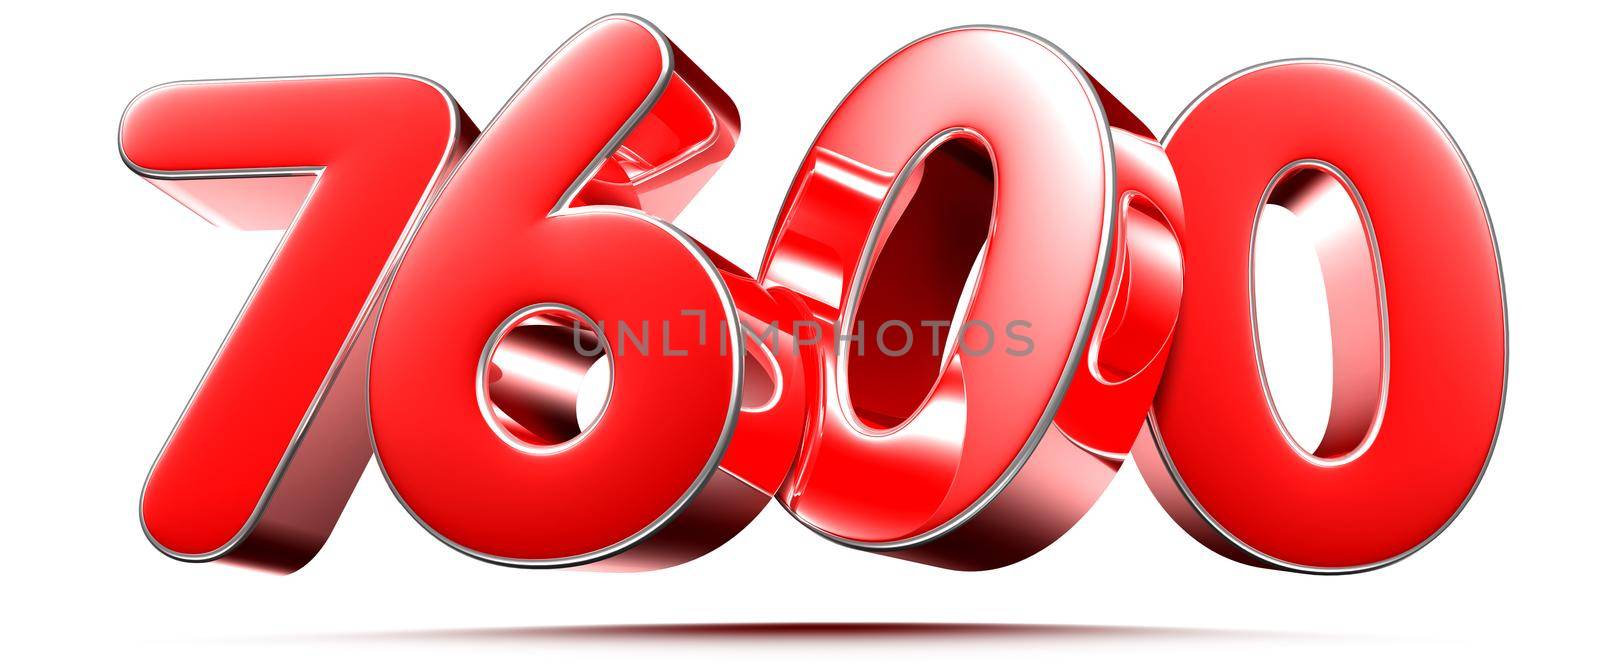 Rounded red numbers 7600 on white background 3D illustration with clipping path by thitimontoyai